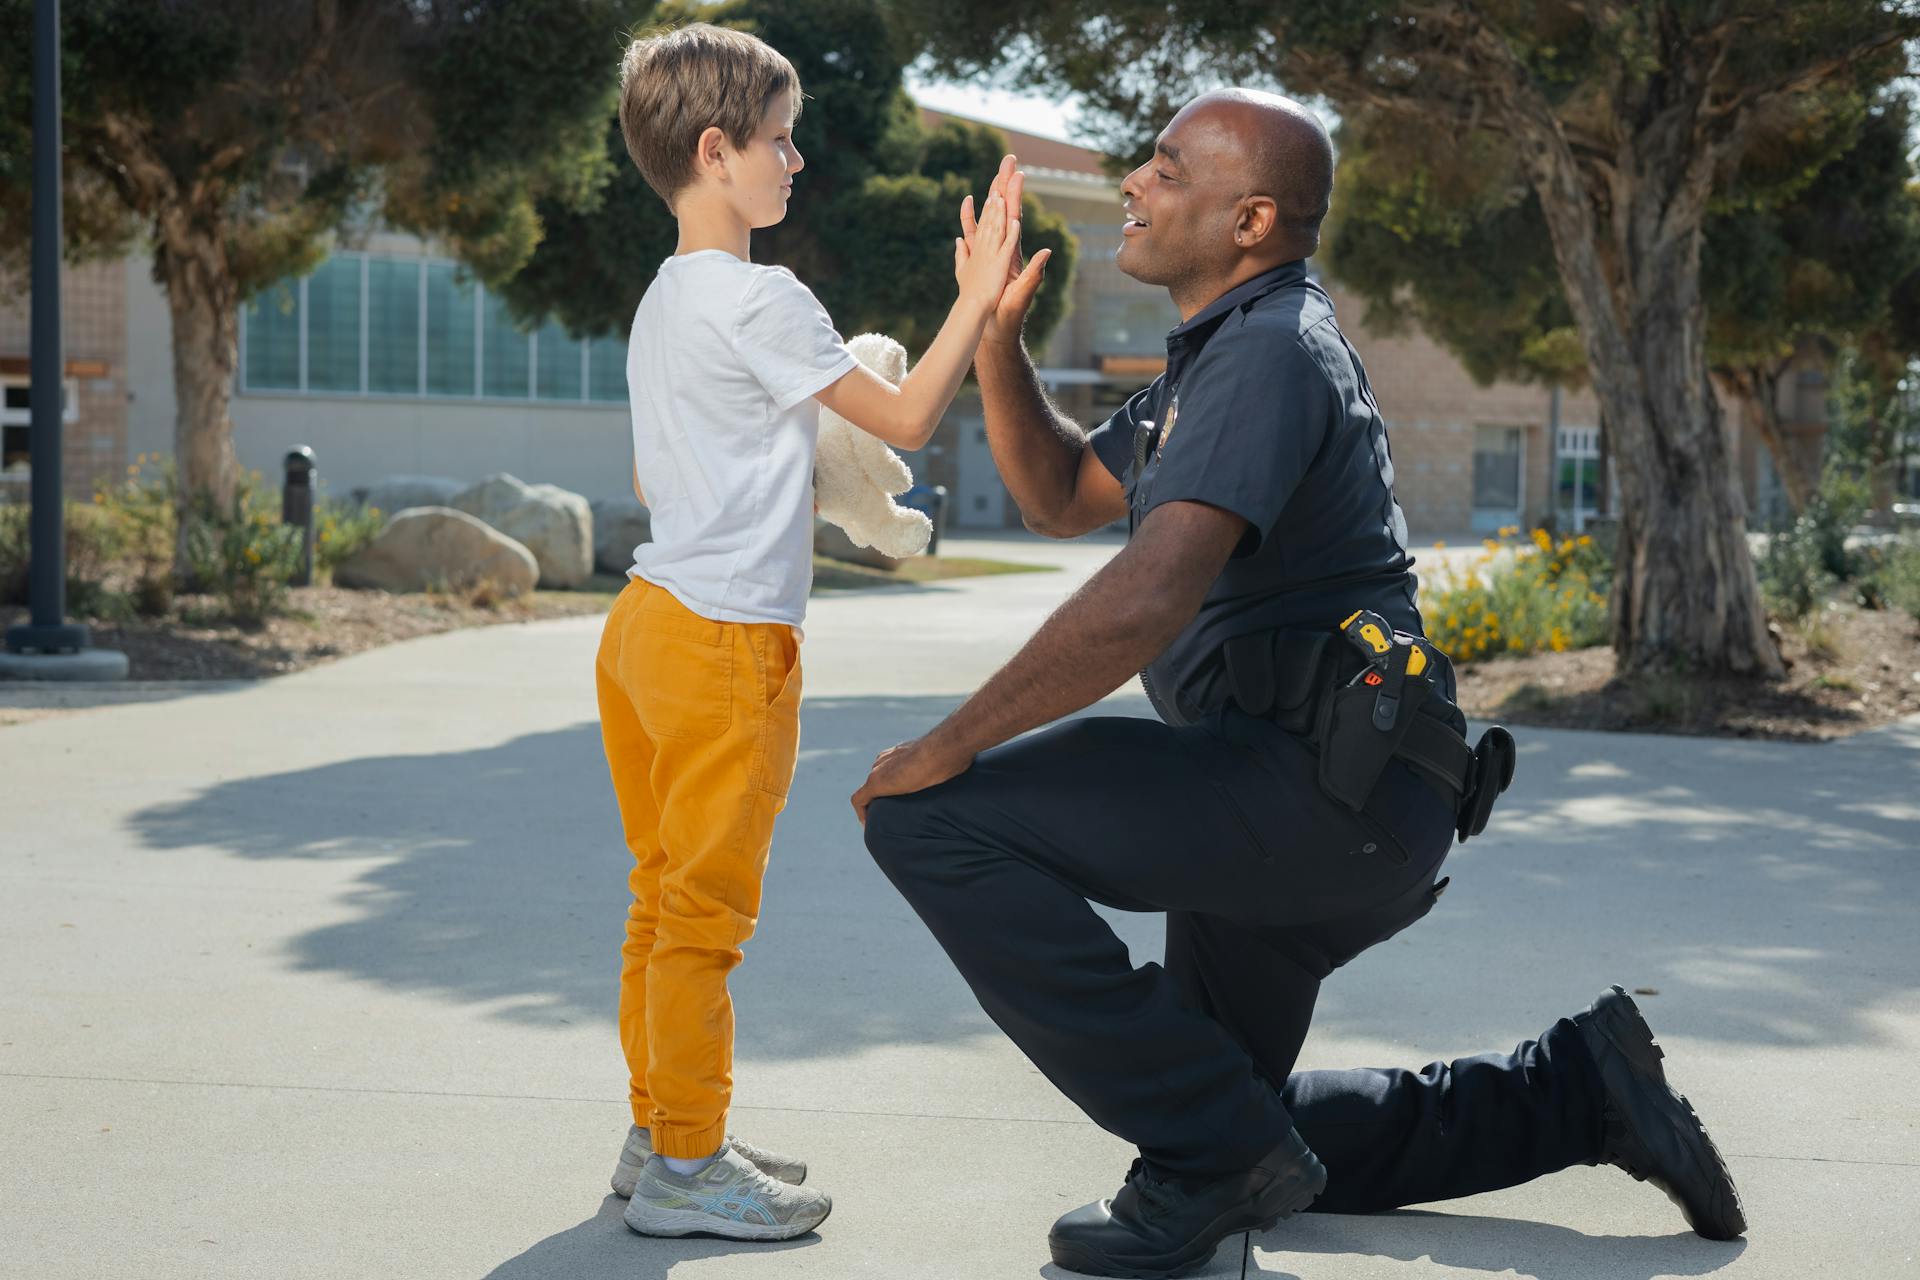 A police officer giving a high-five to a boy | Source: Pexels